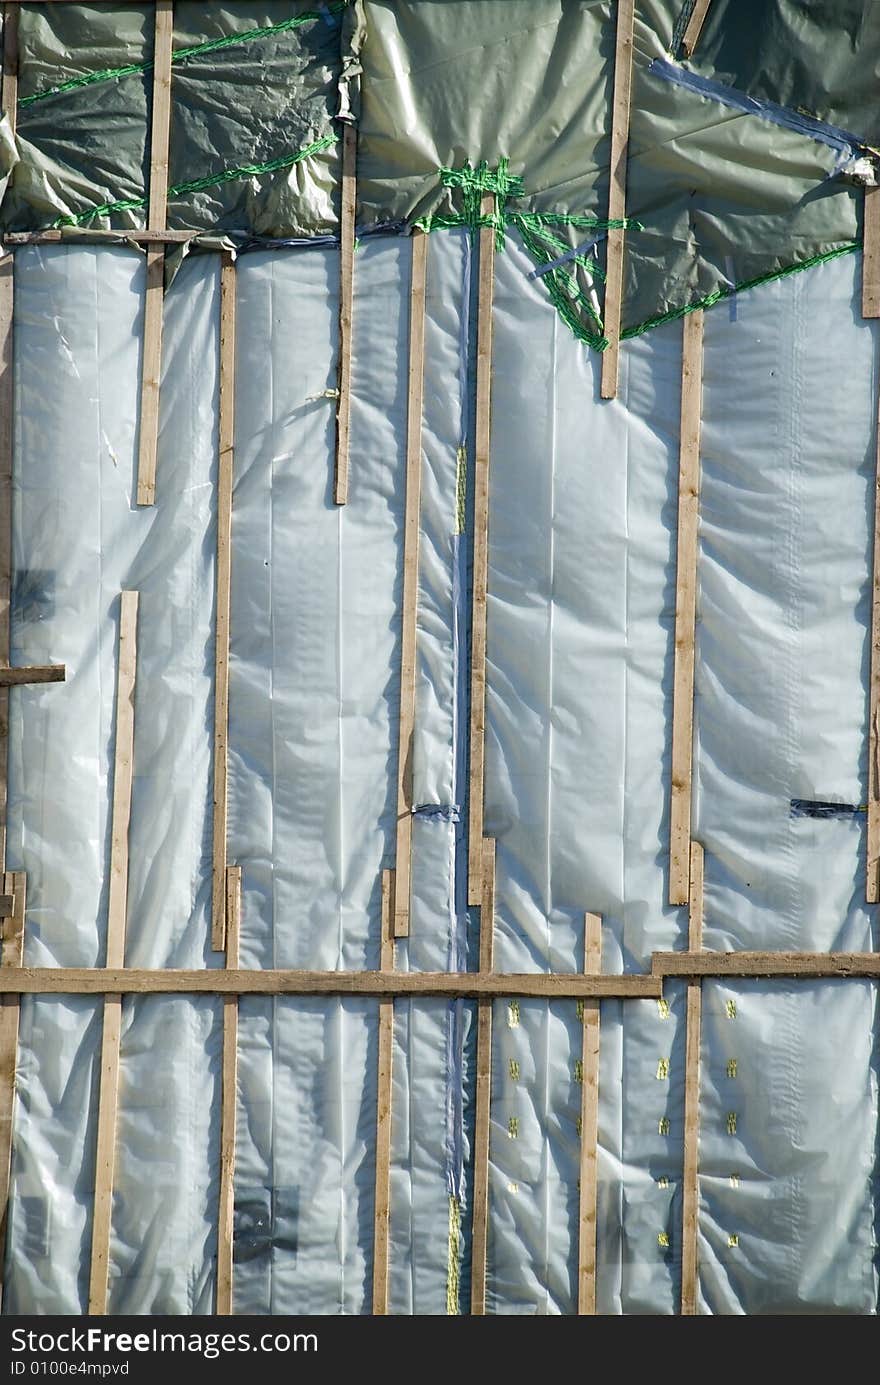 A building site detail of a foiled wall